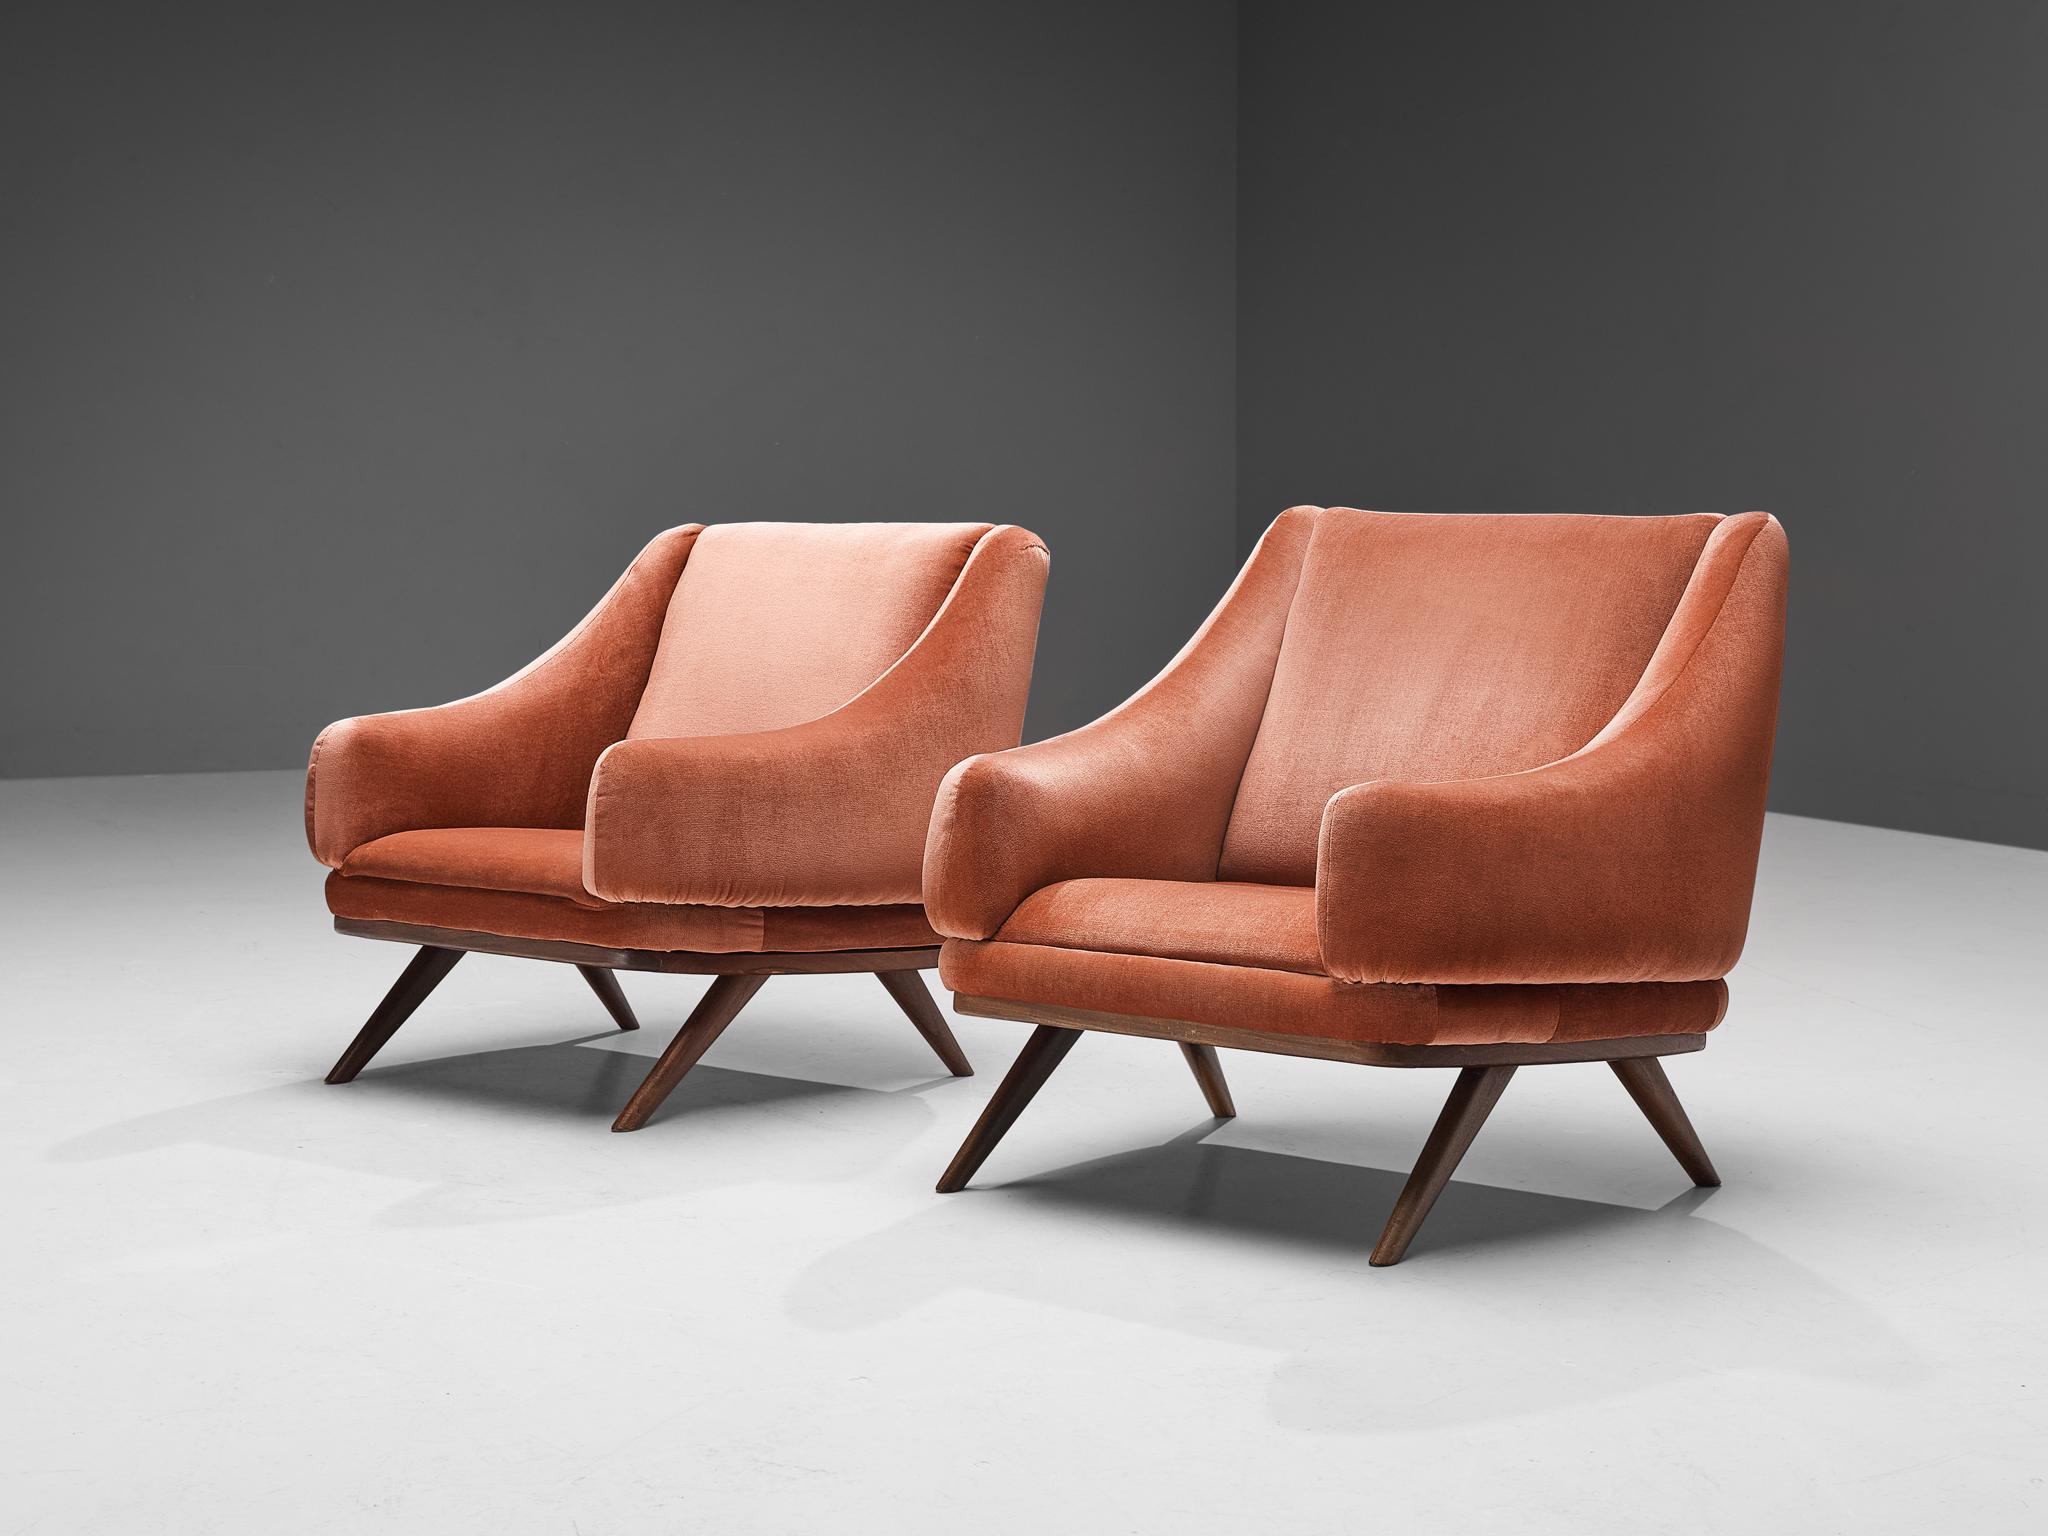 Mid-20th Century Pair of Danish Armchairs in Teak and Pink Velvet Upholstery